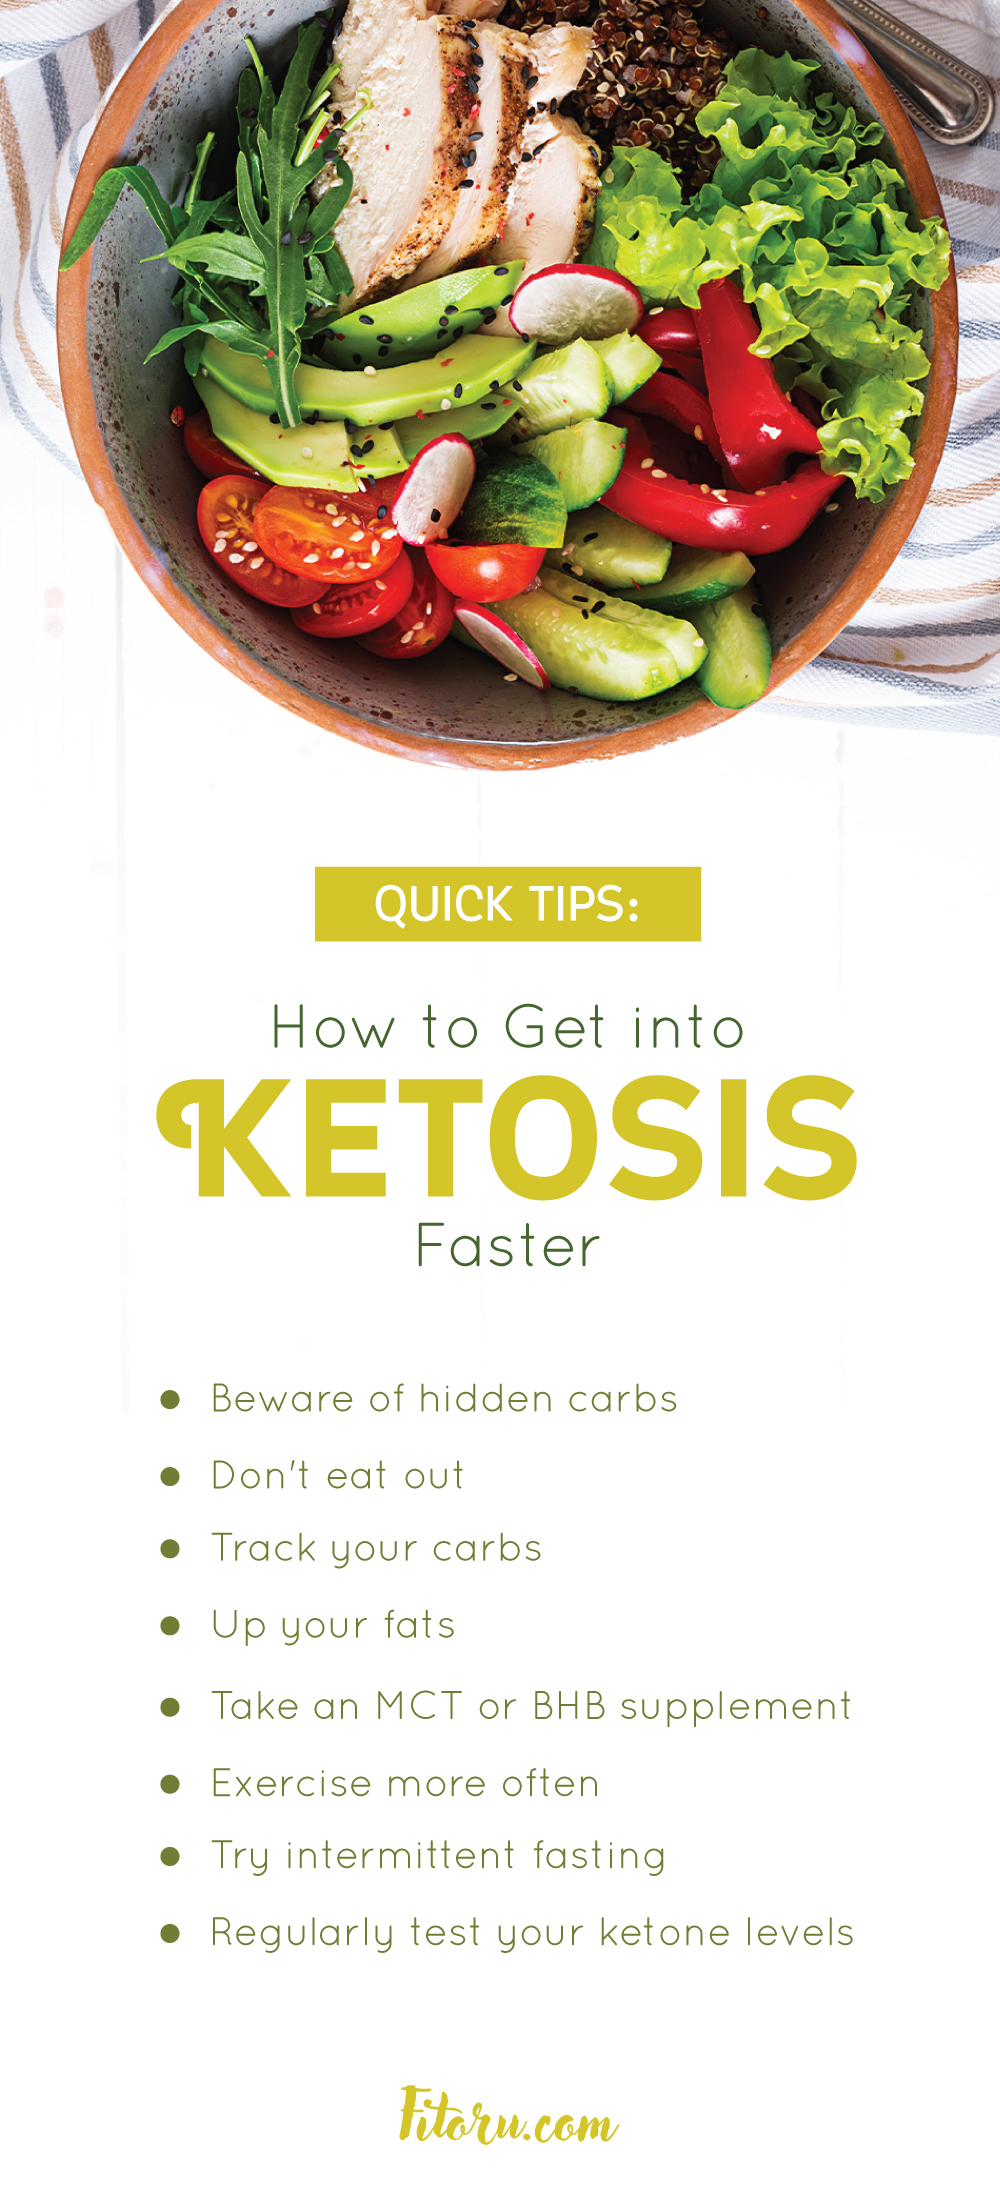 How long to get into ketosis?